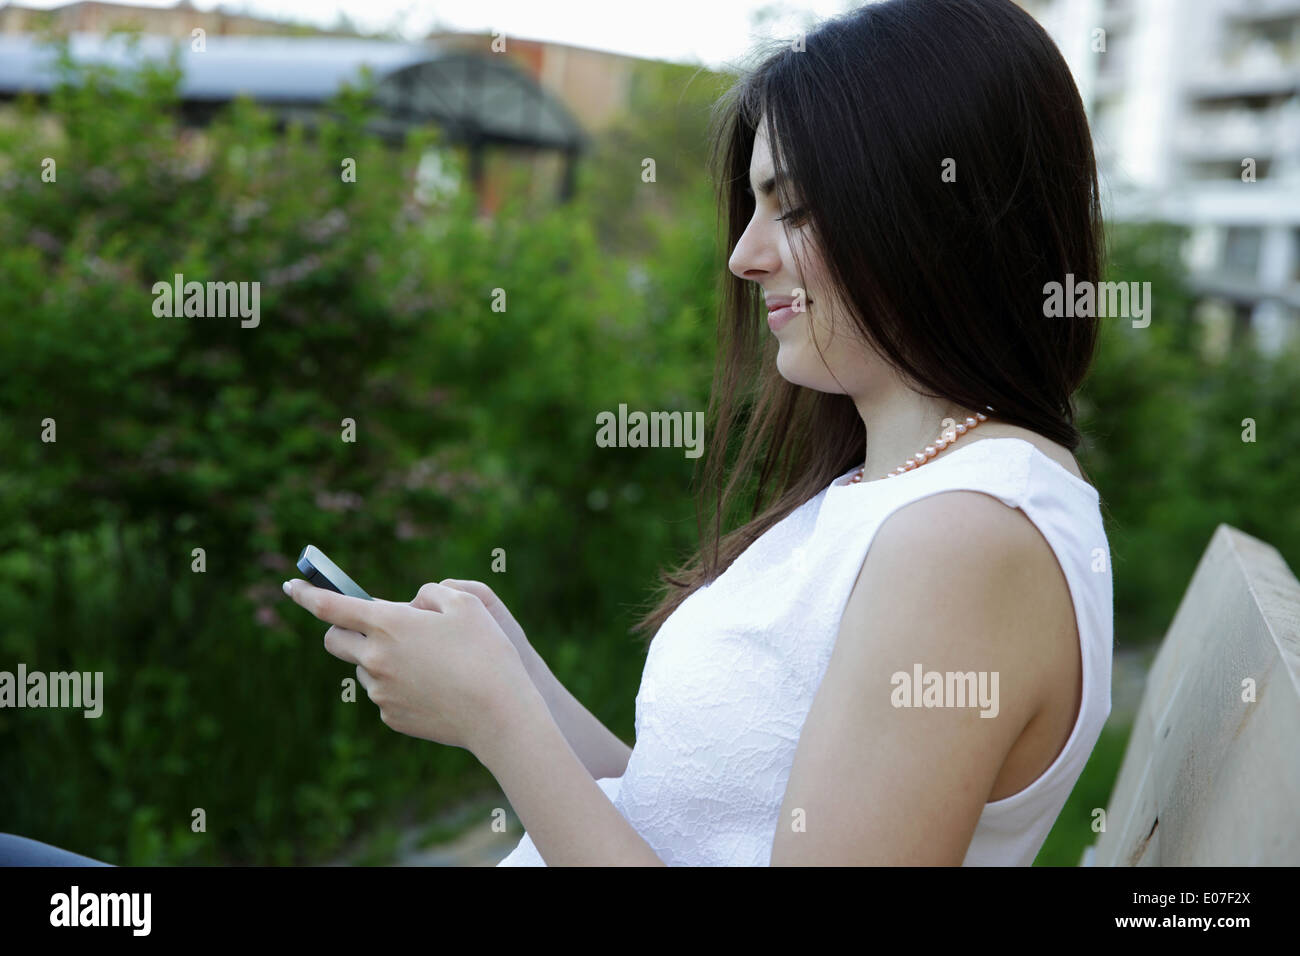 Side view portrait of a woman sitting on the outdoor bench and typing on the phone Stock Photo